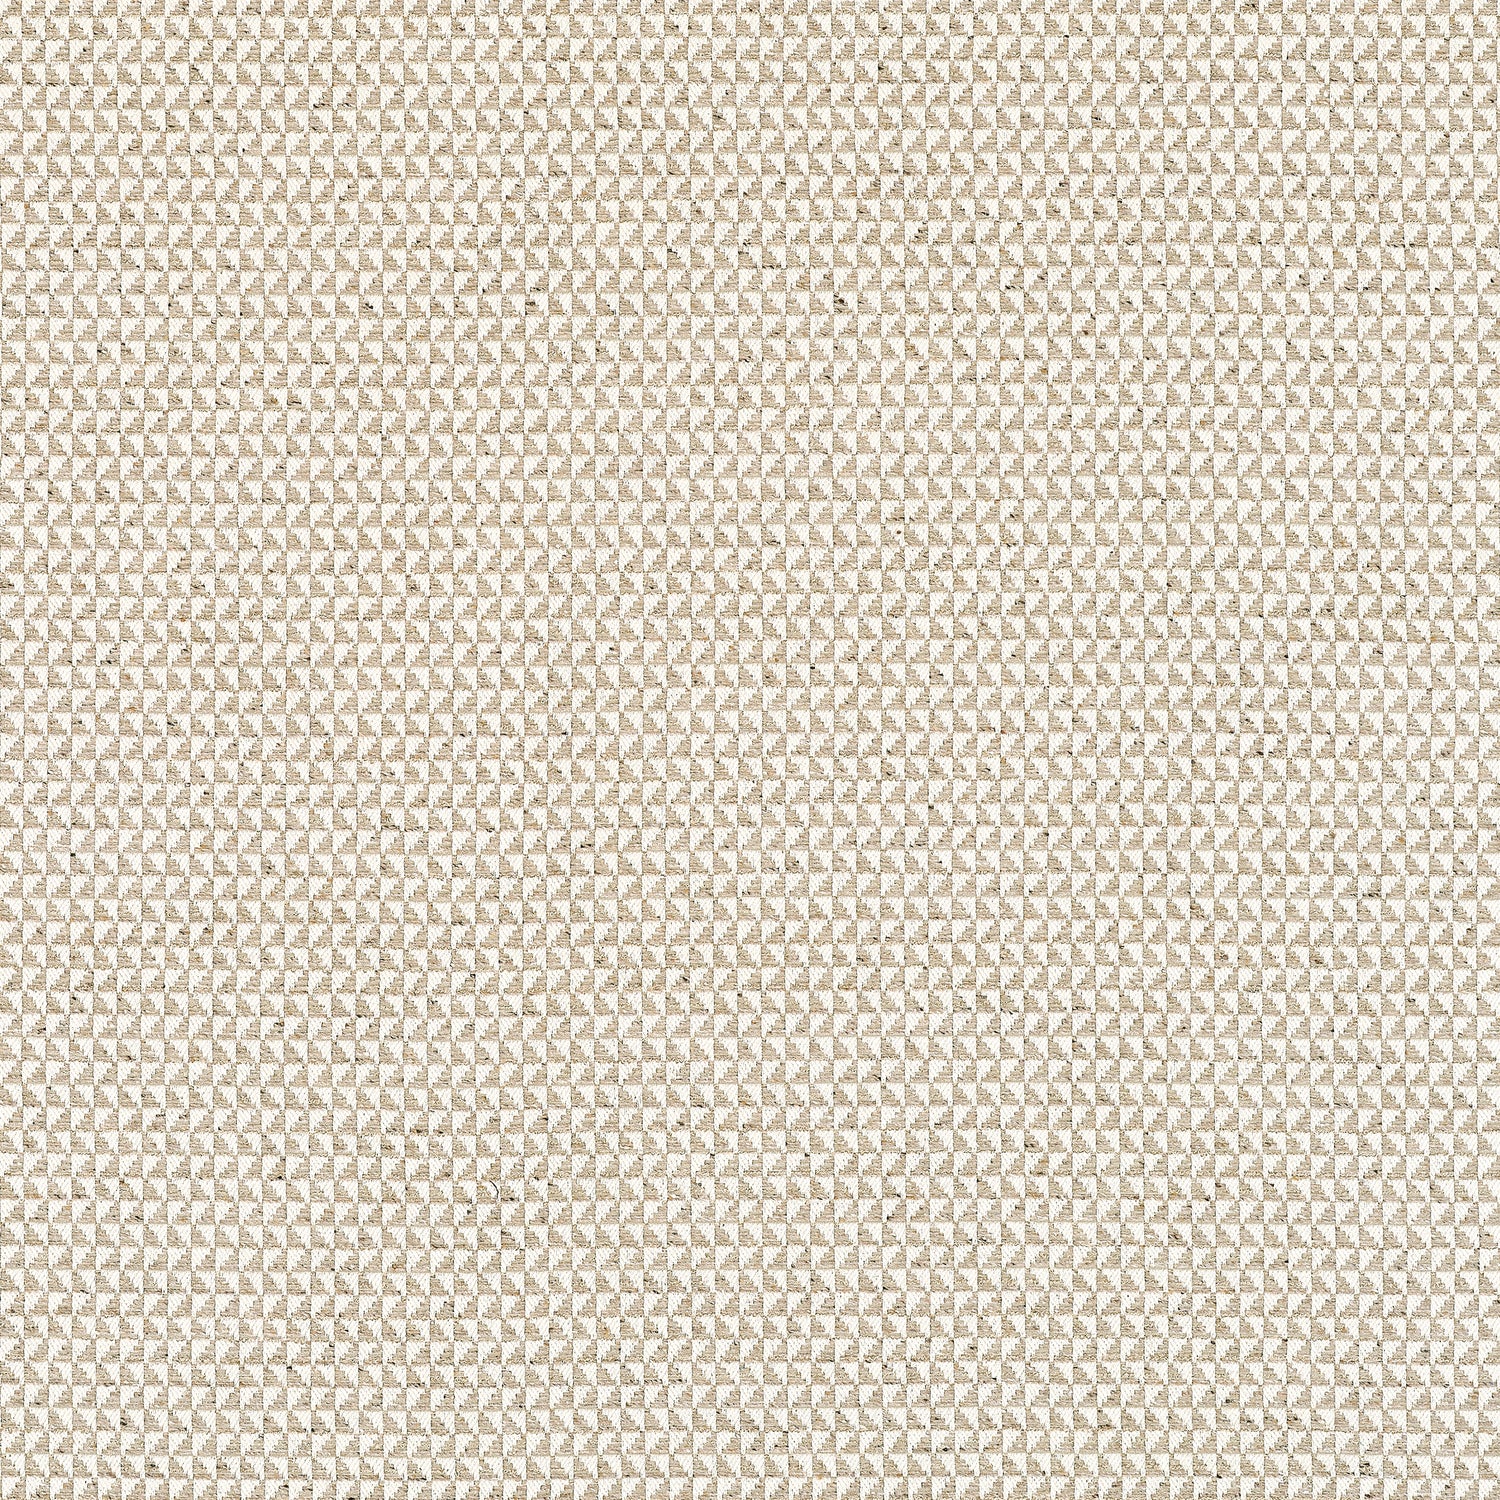 Pollux fabric in flax color - pattern number W81912 - by Thibaut in the Companions collection